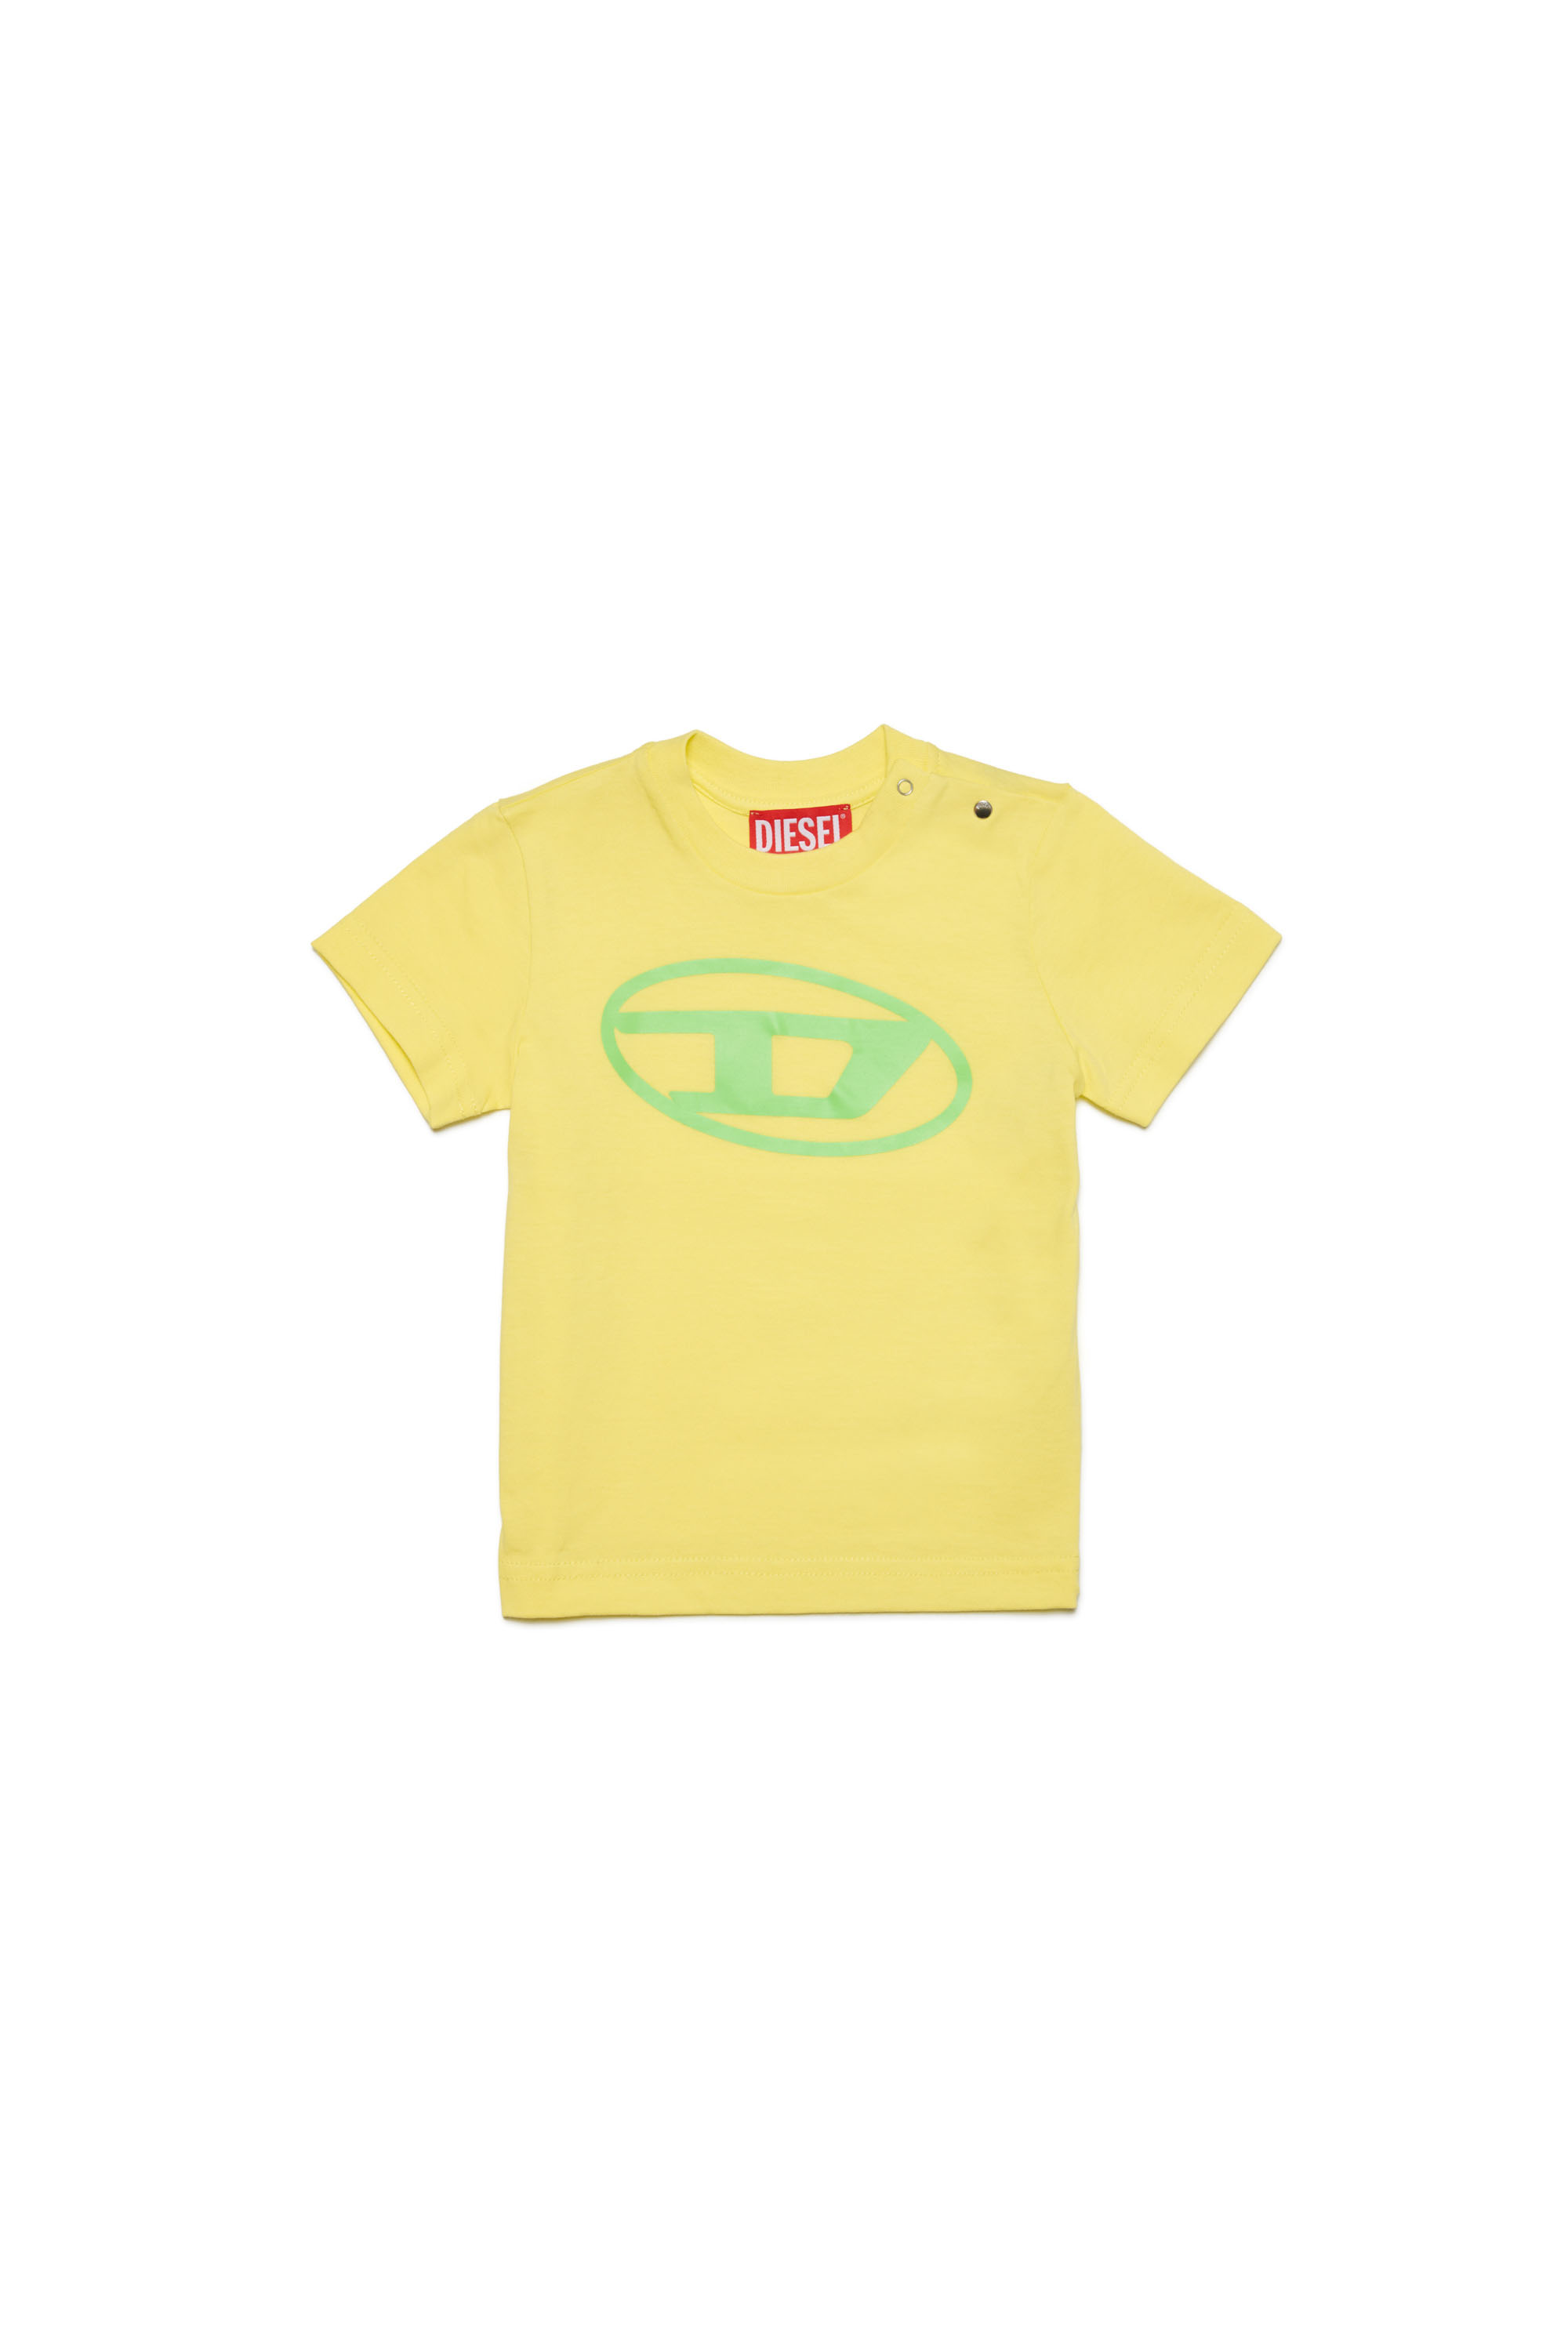 Diesel - TCERB, Unisex T-shirt with Oval D logo in Yellow - Image 1